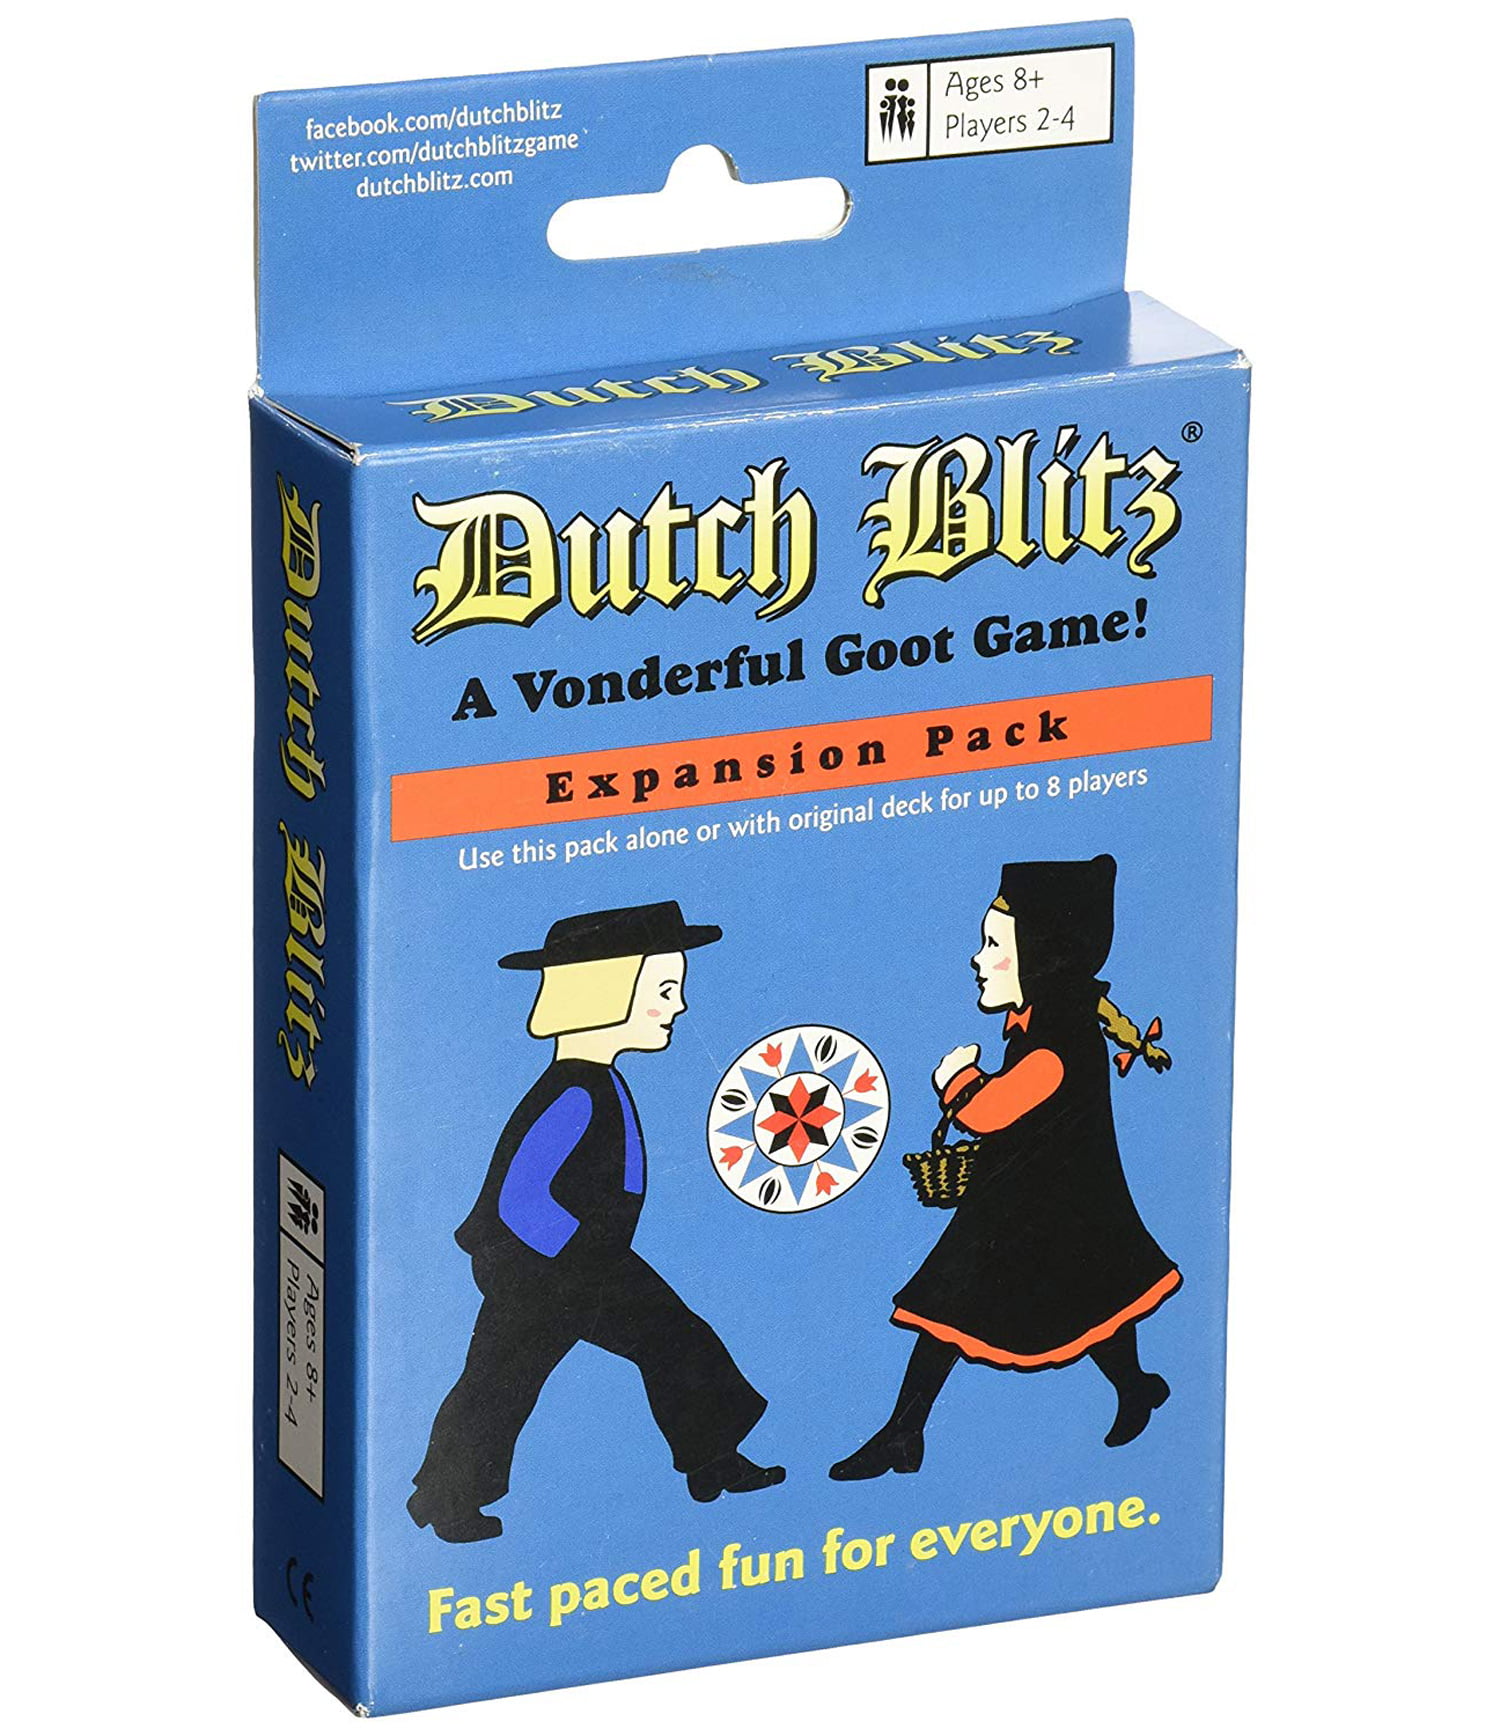 New Dutch Blitz Card Game Original And Expansion Pack Combo Kids Age 8 And up 